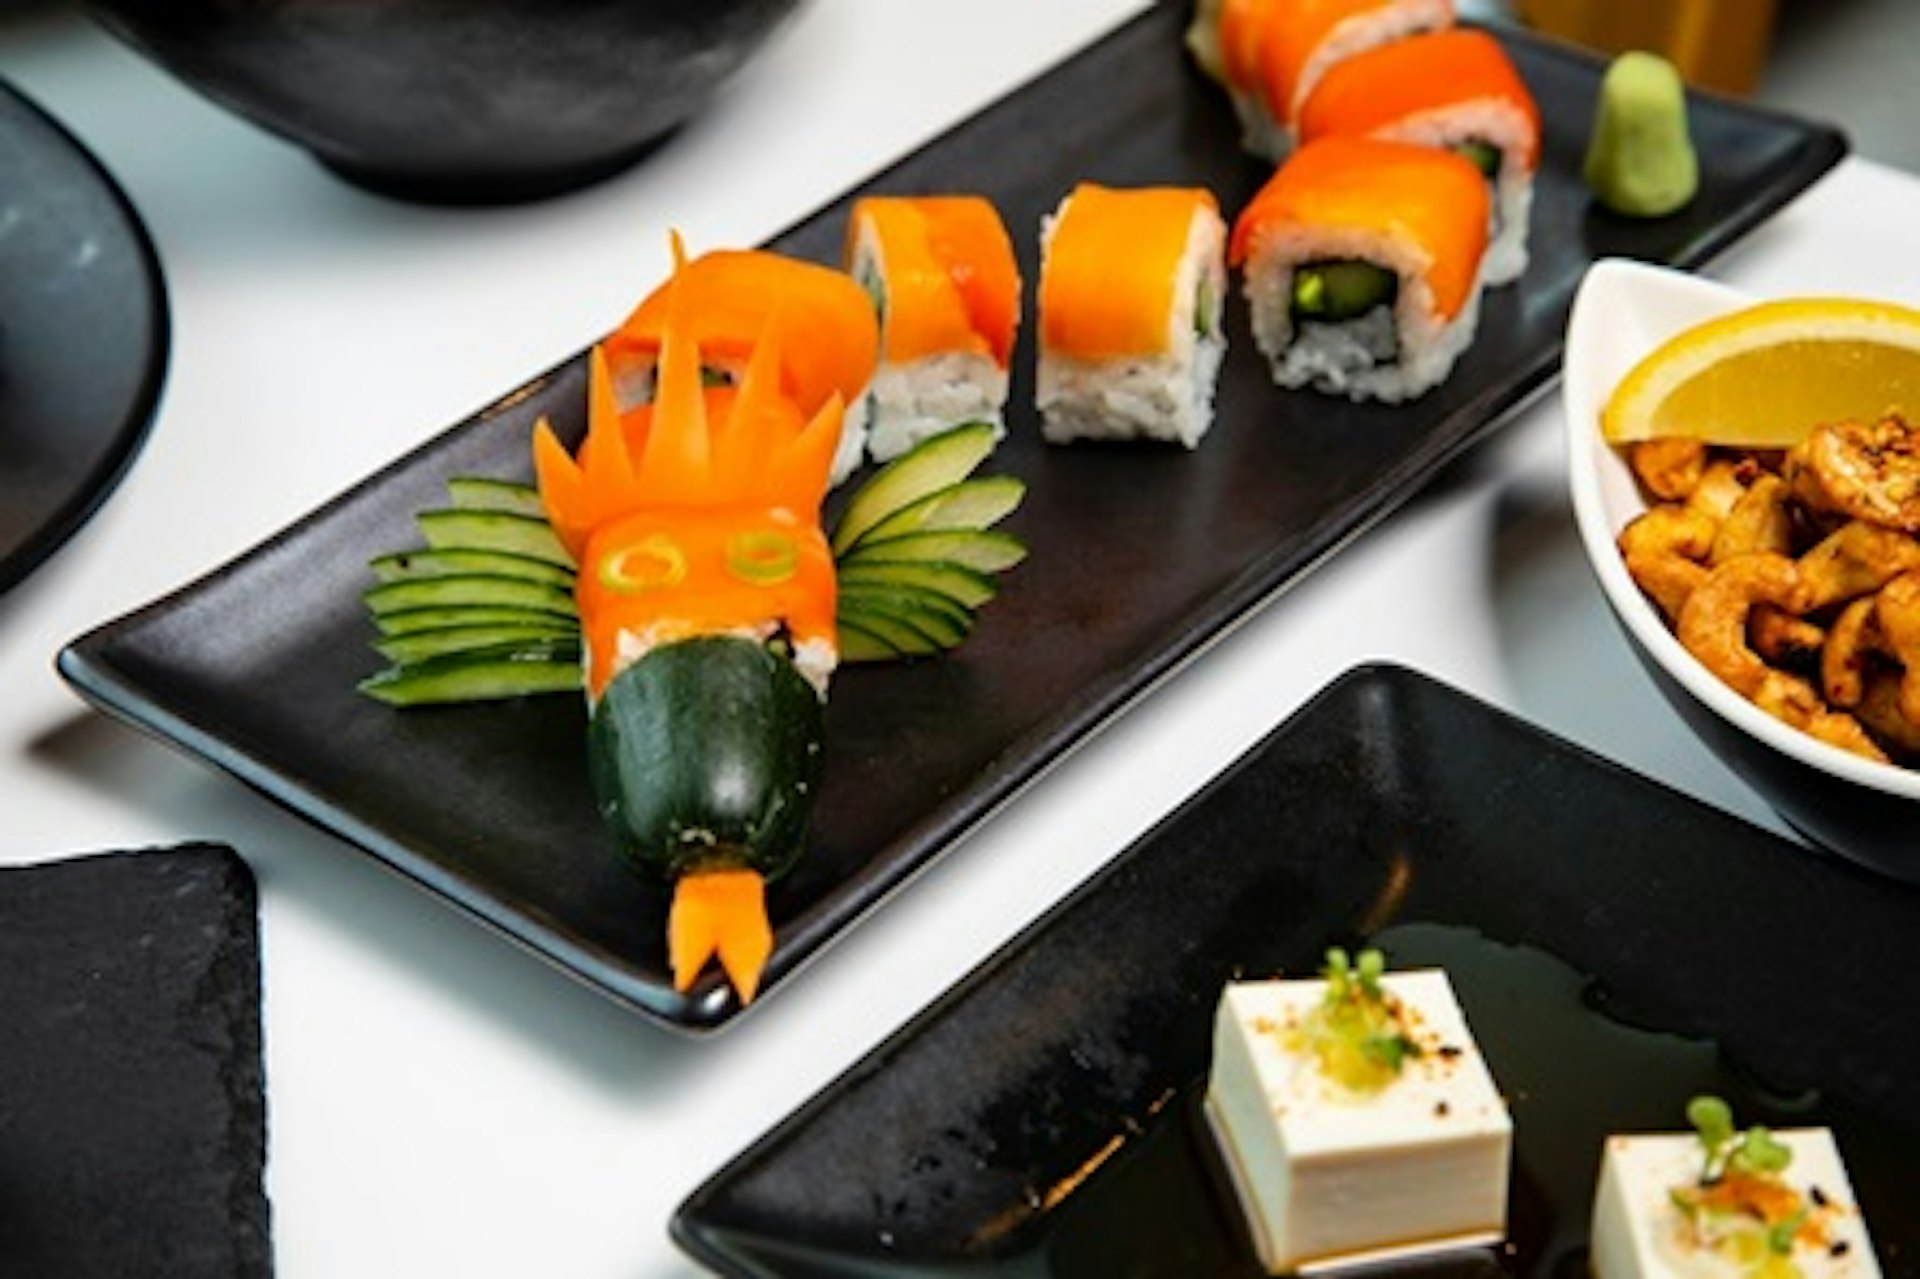 Create Your Own Sushi Dragon with Free Flowing Brunch for Two at inamo, London 3